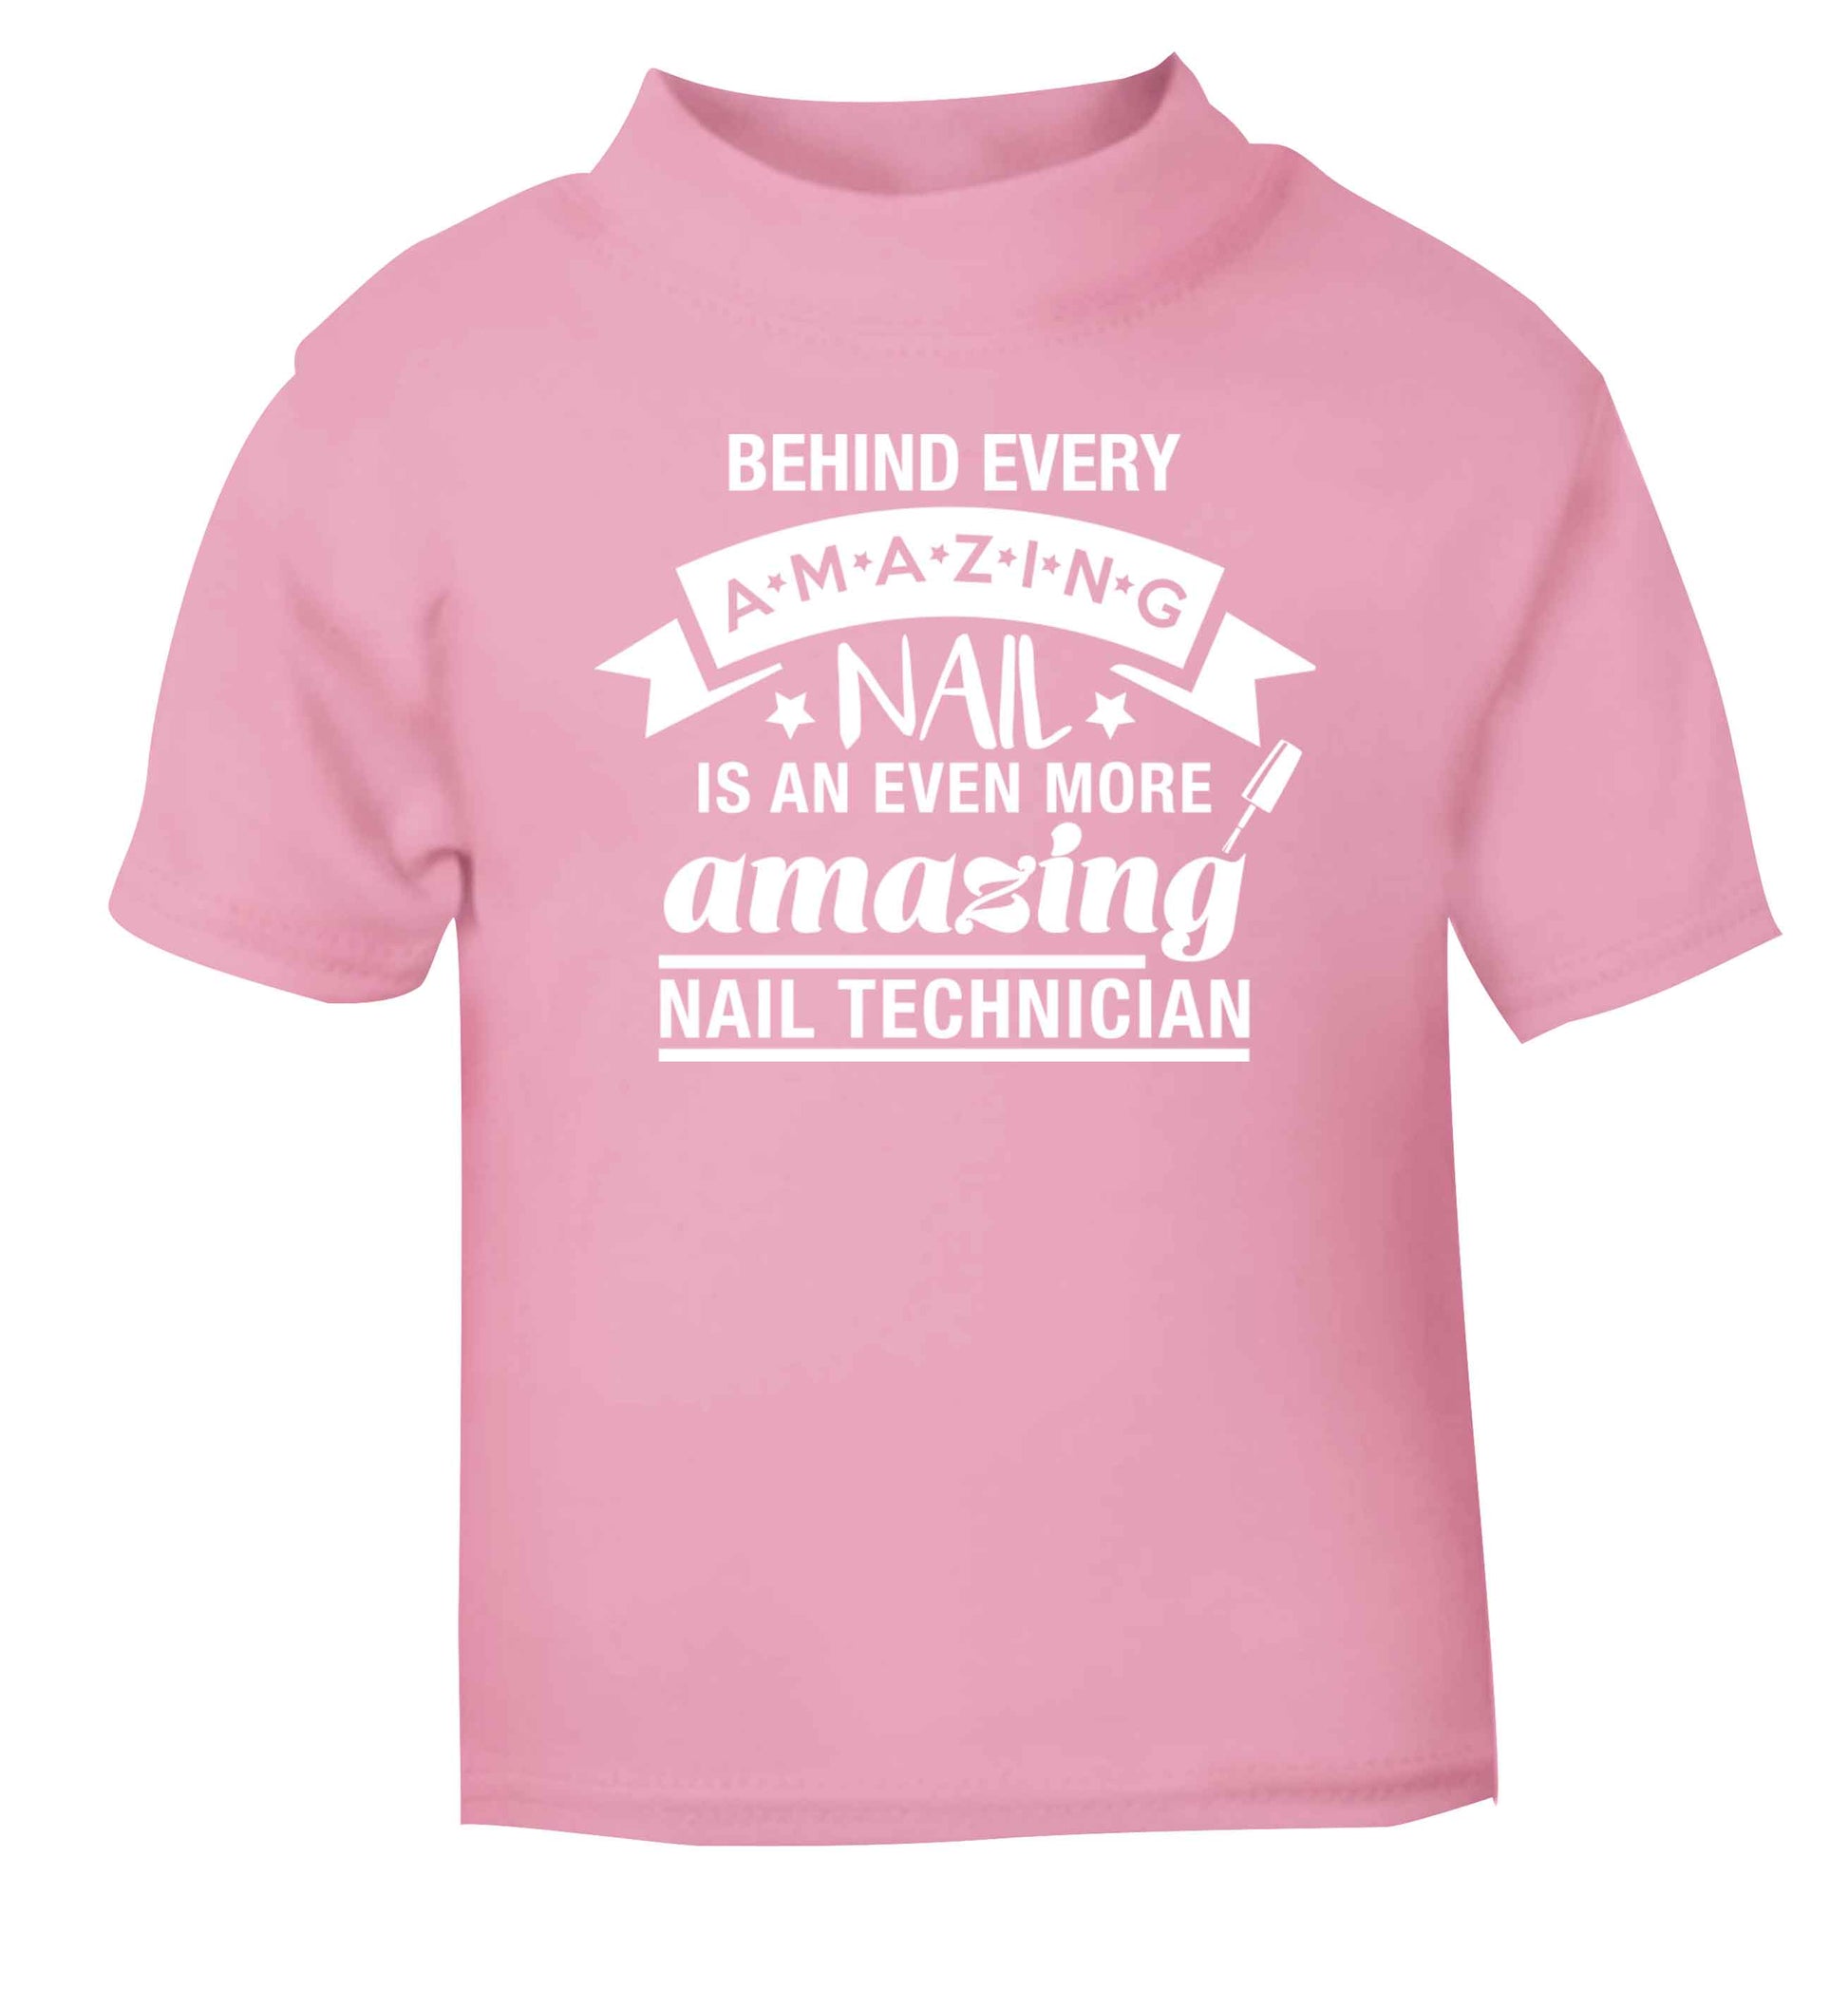 Behind every amazing nail is an even more amazing nail technician light pink baby toddler Tshirt 2 Years